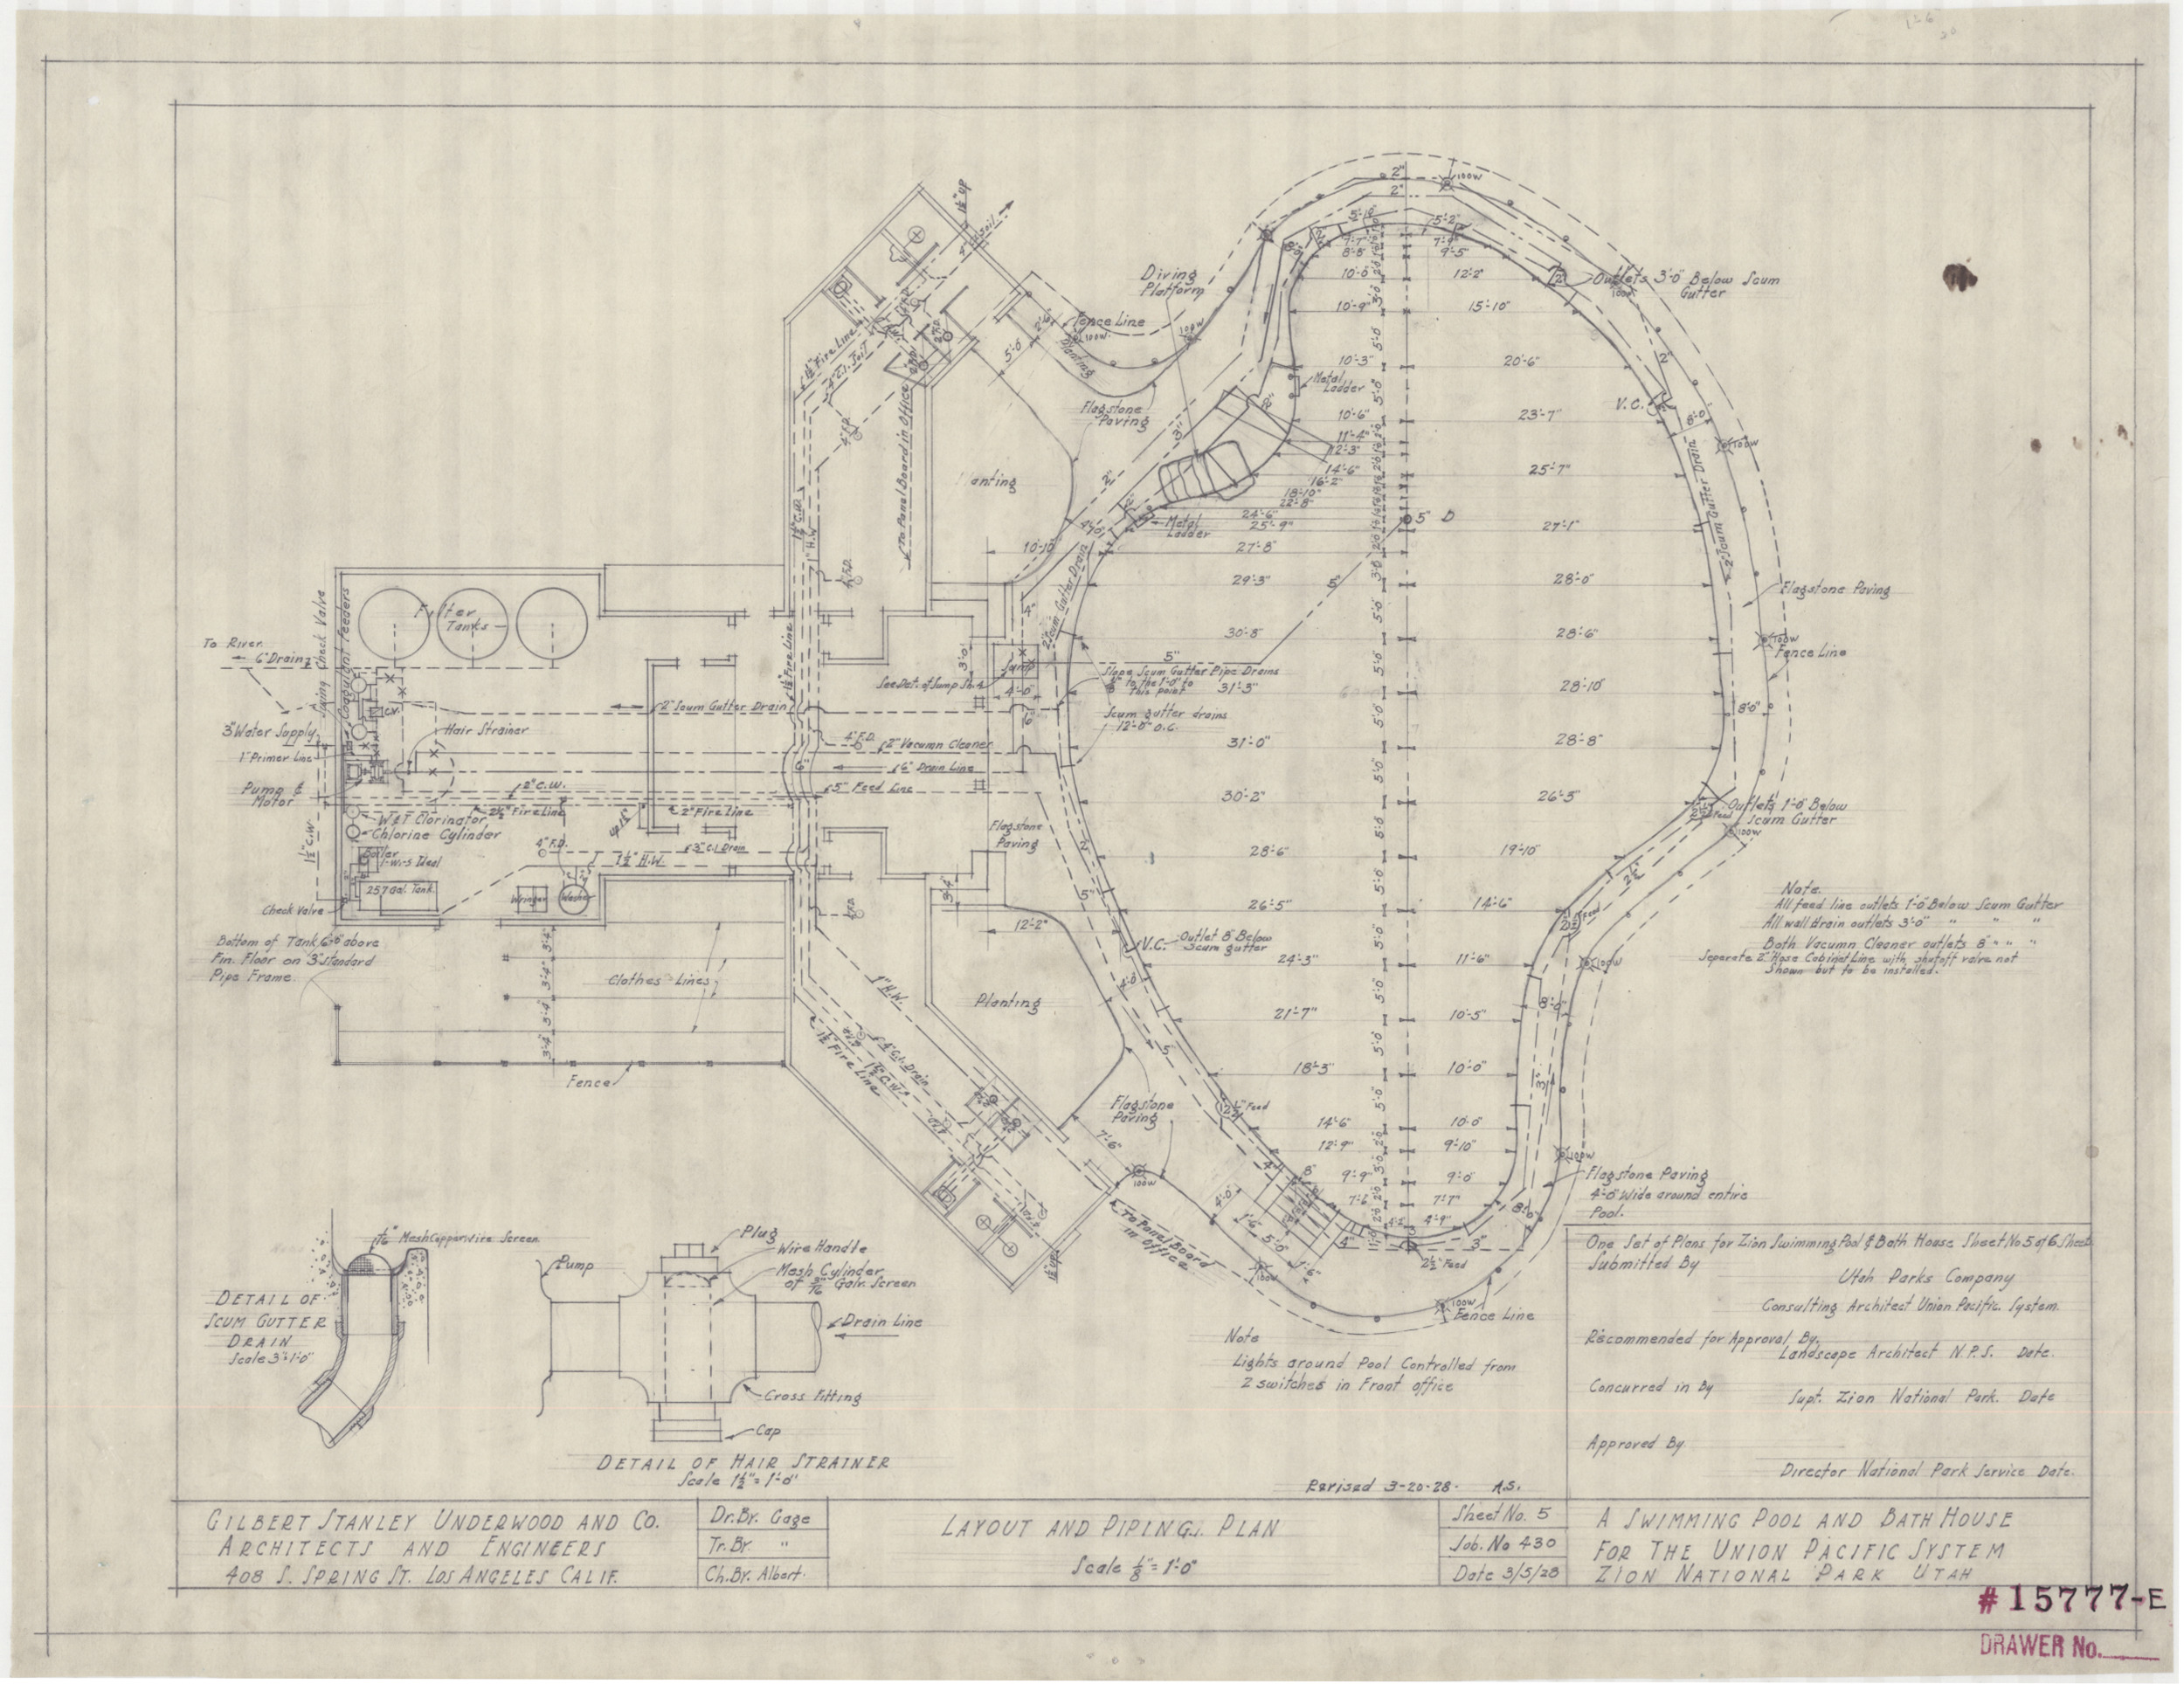 Architectural drawing of swimming pool & bath house at Zion National Park, Utah, floor plan, March 5, 1928, sheet no. 5, layout and piping plan